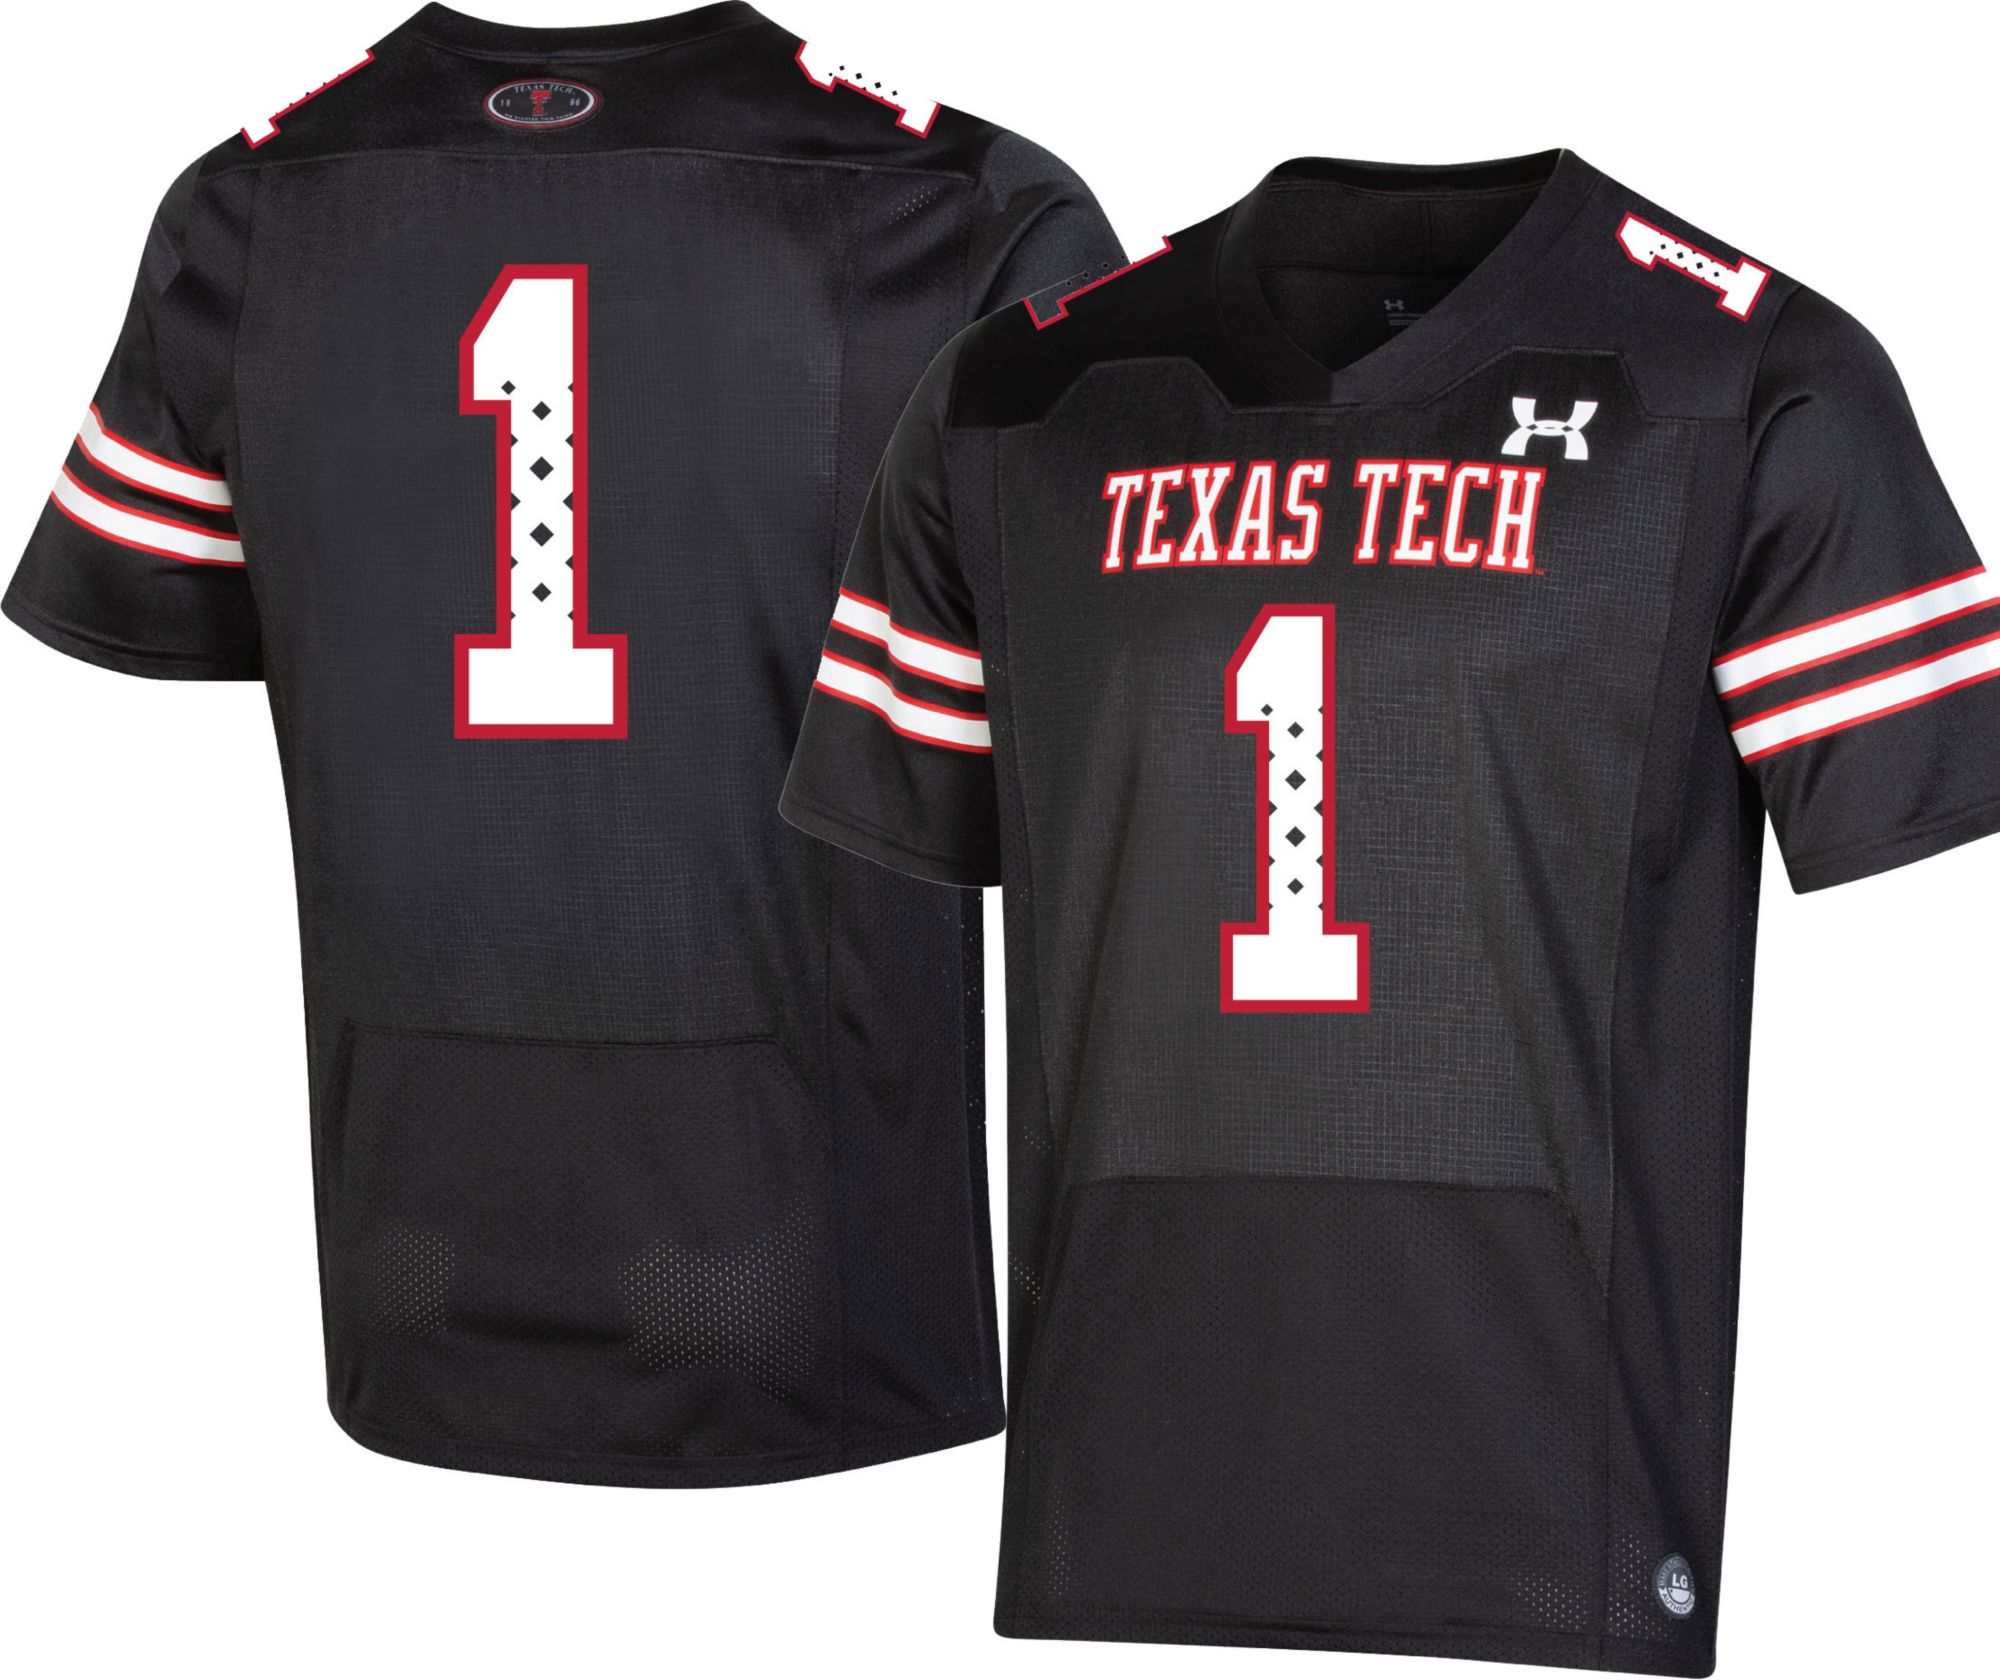 Men's Under Armour #16 Red Texas Tech Raiders Replica Jersey Size: Extra Large